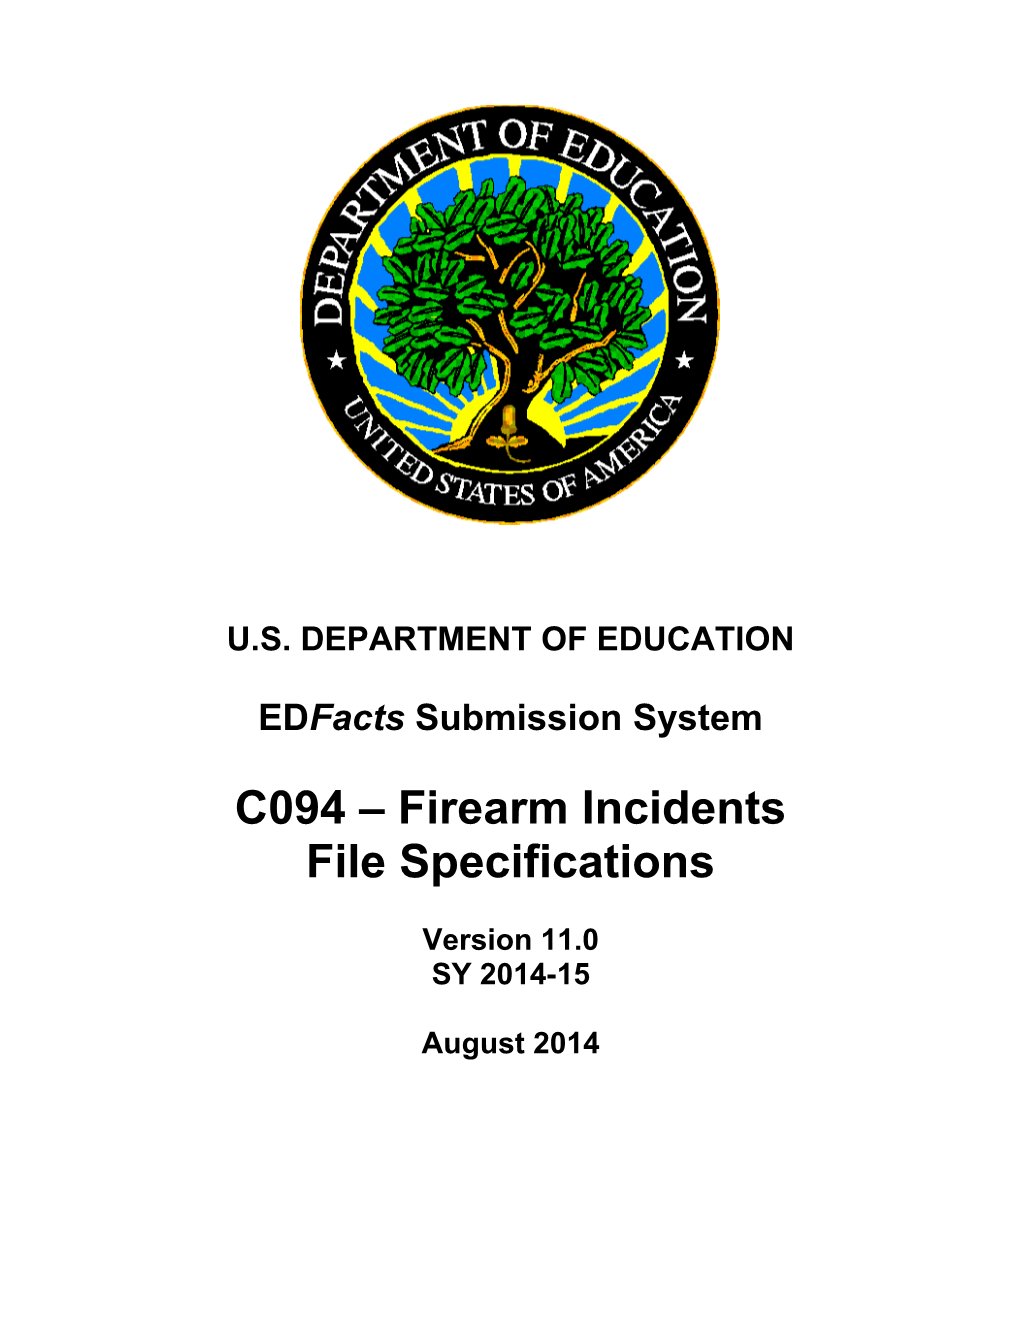 Firearm Incidents File Specifications